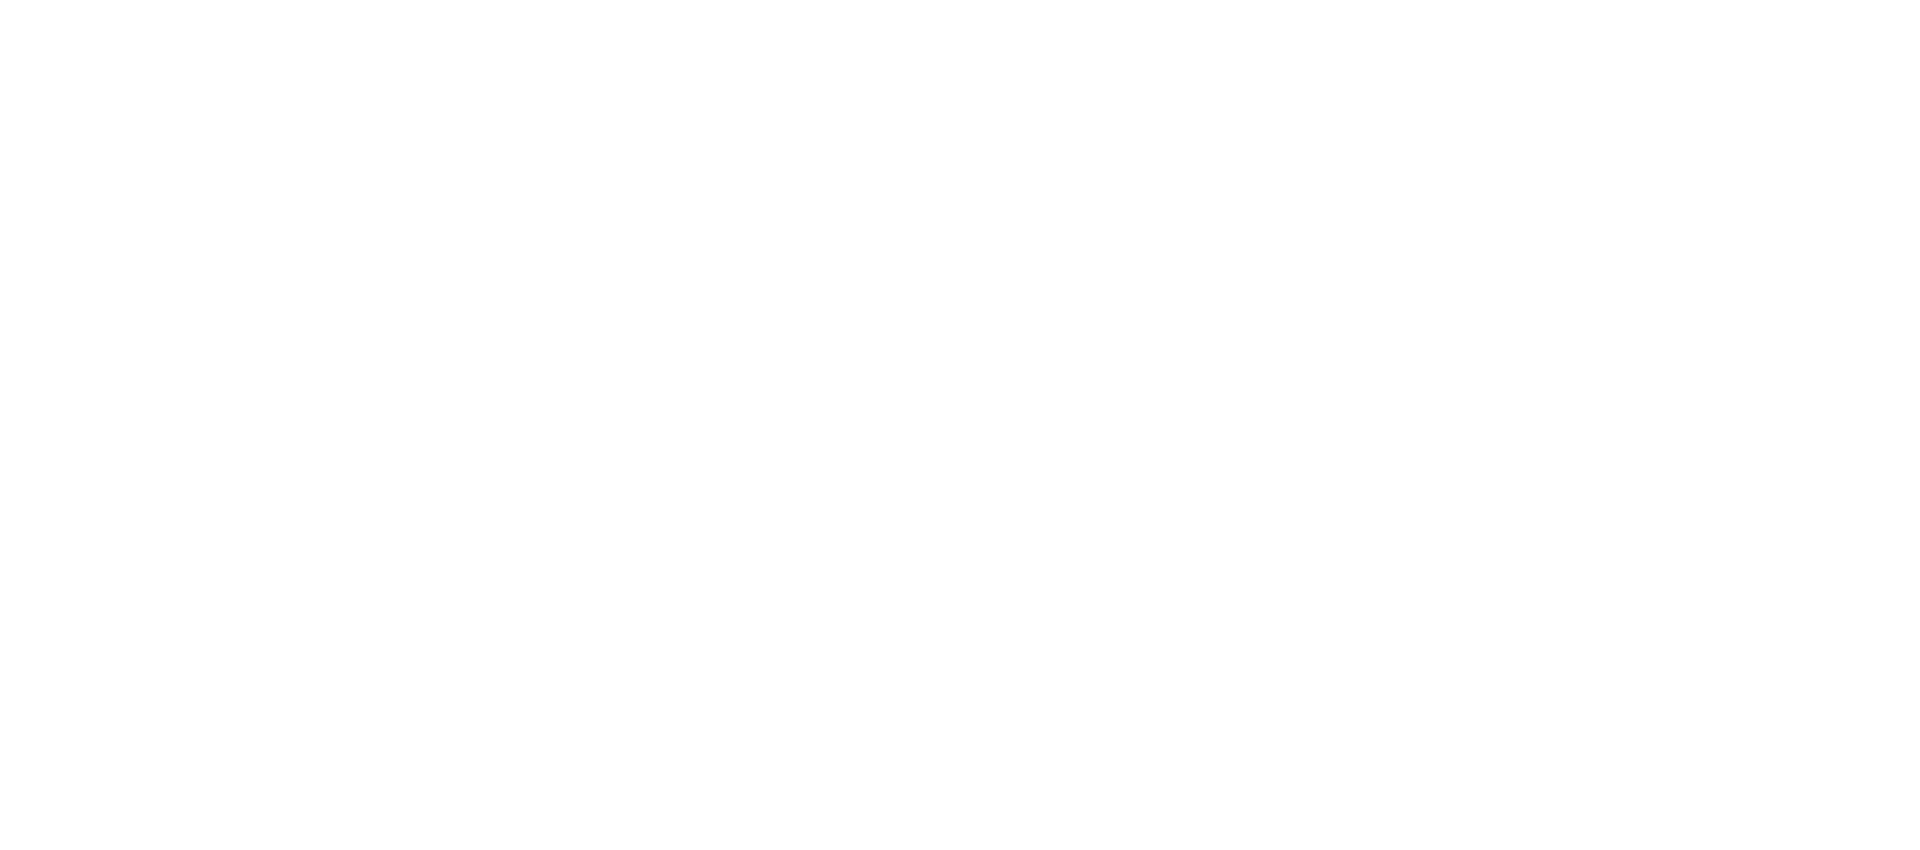 We create living architecture